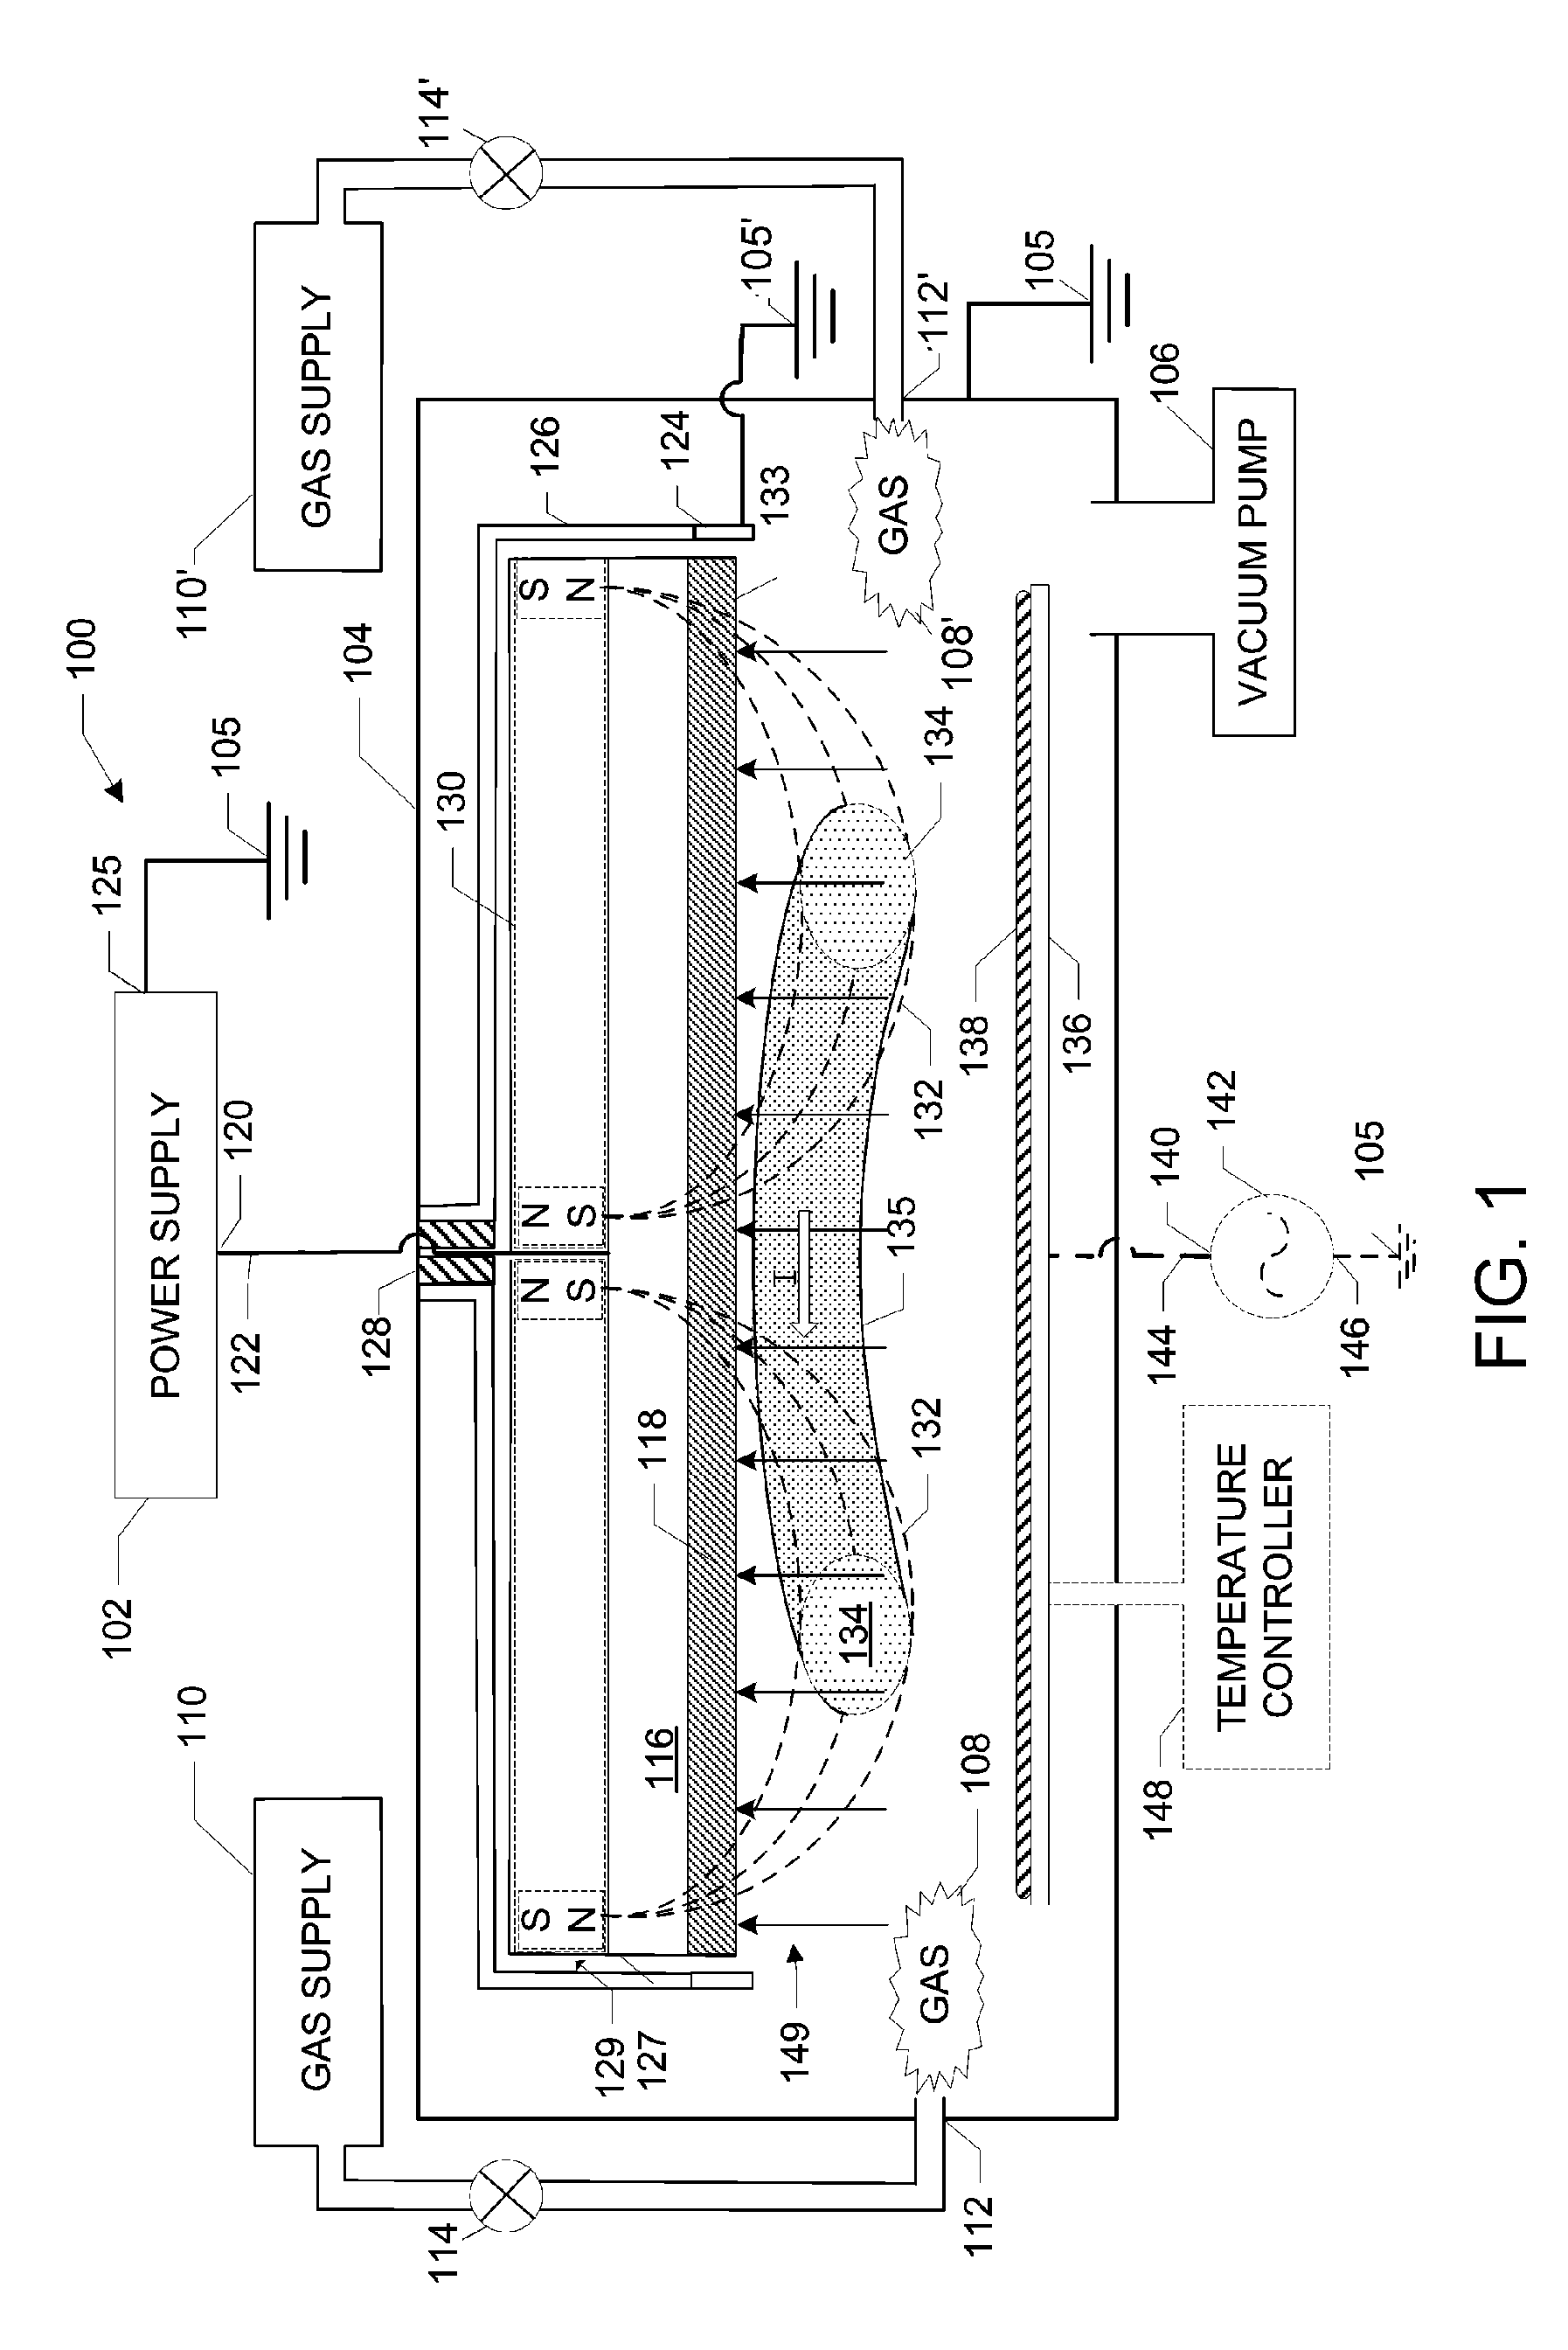 Apparatus for generating high current electrical discharges